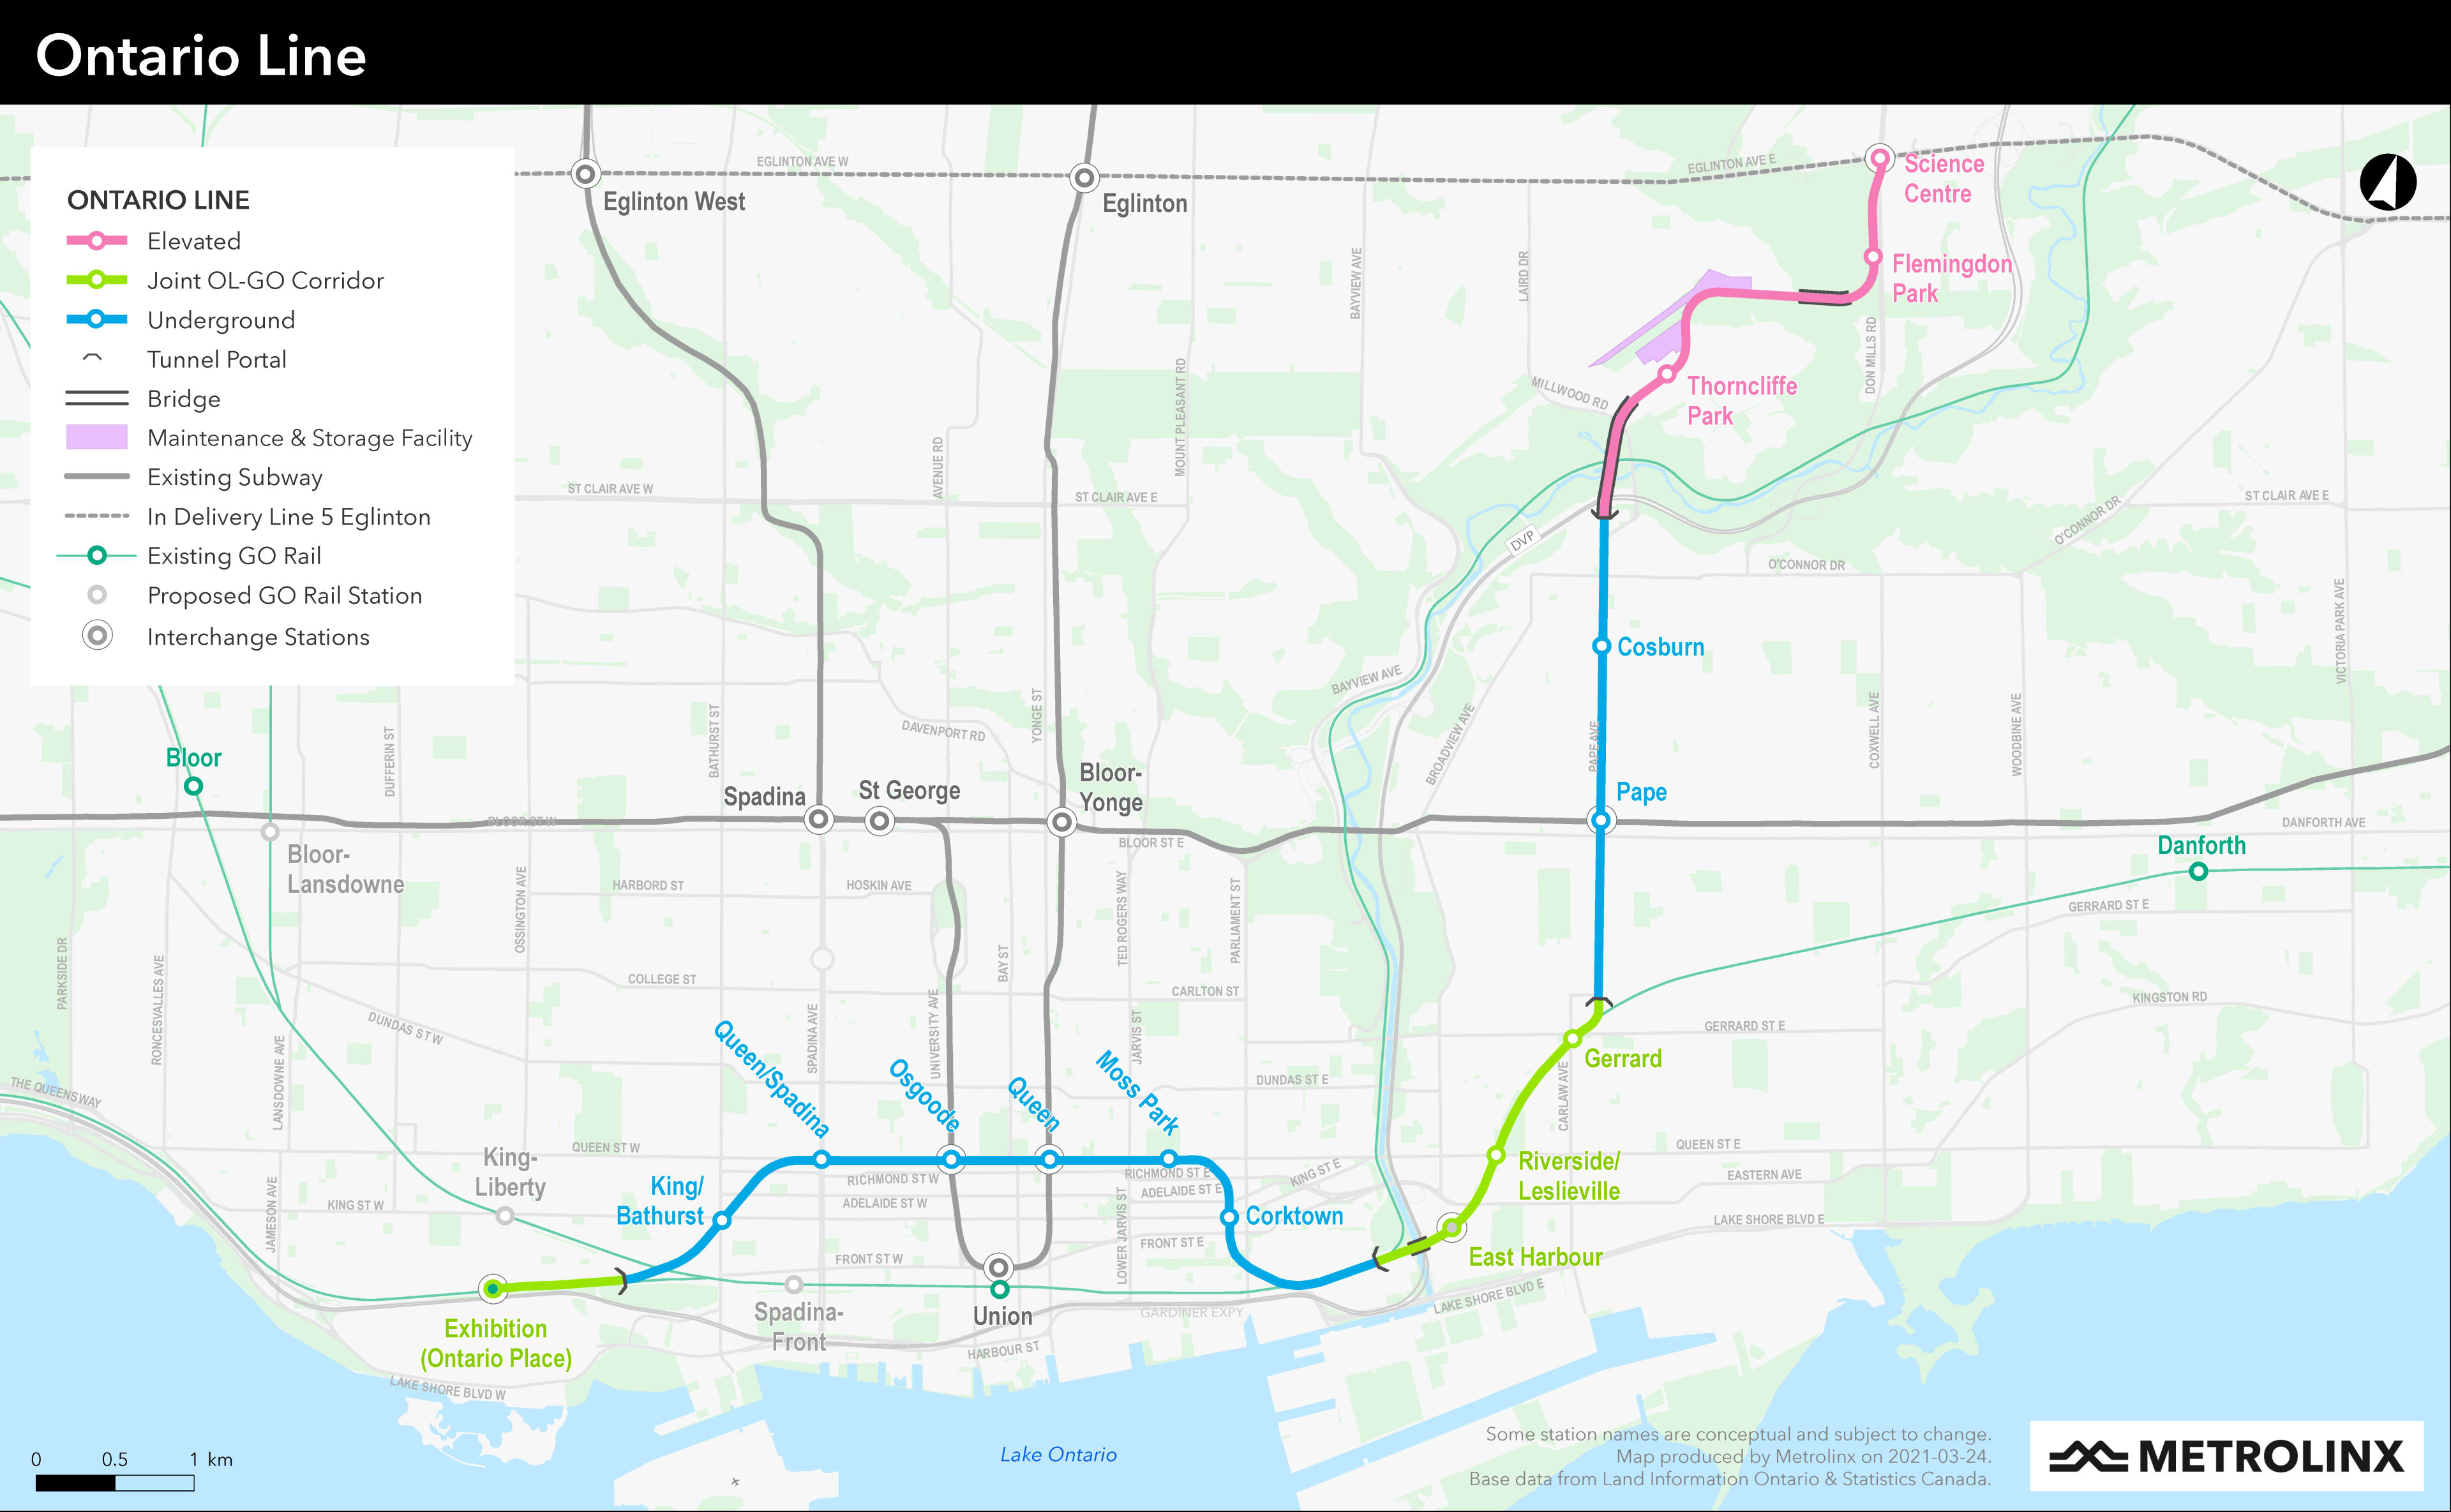 Ontario Line overview map of the full route and stations